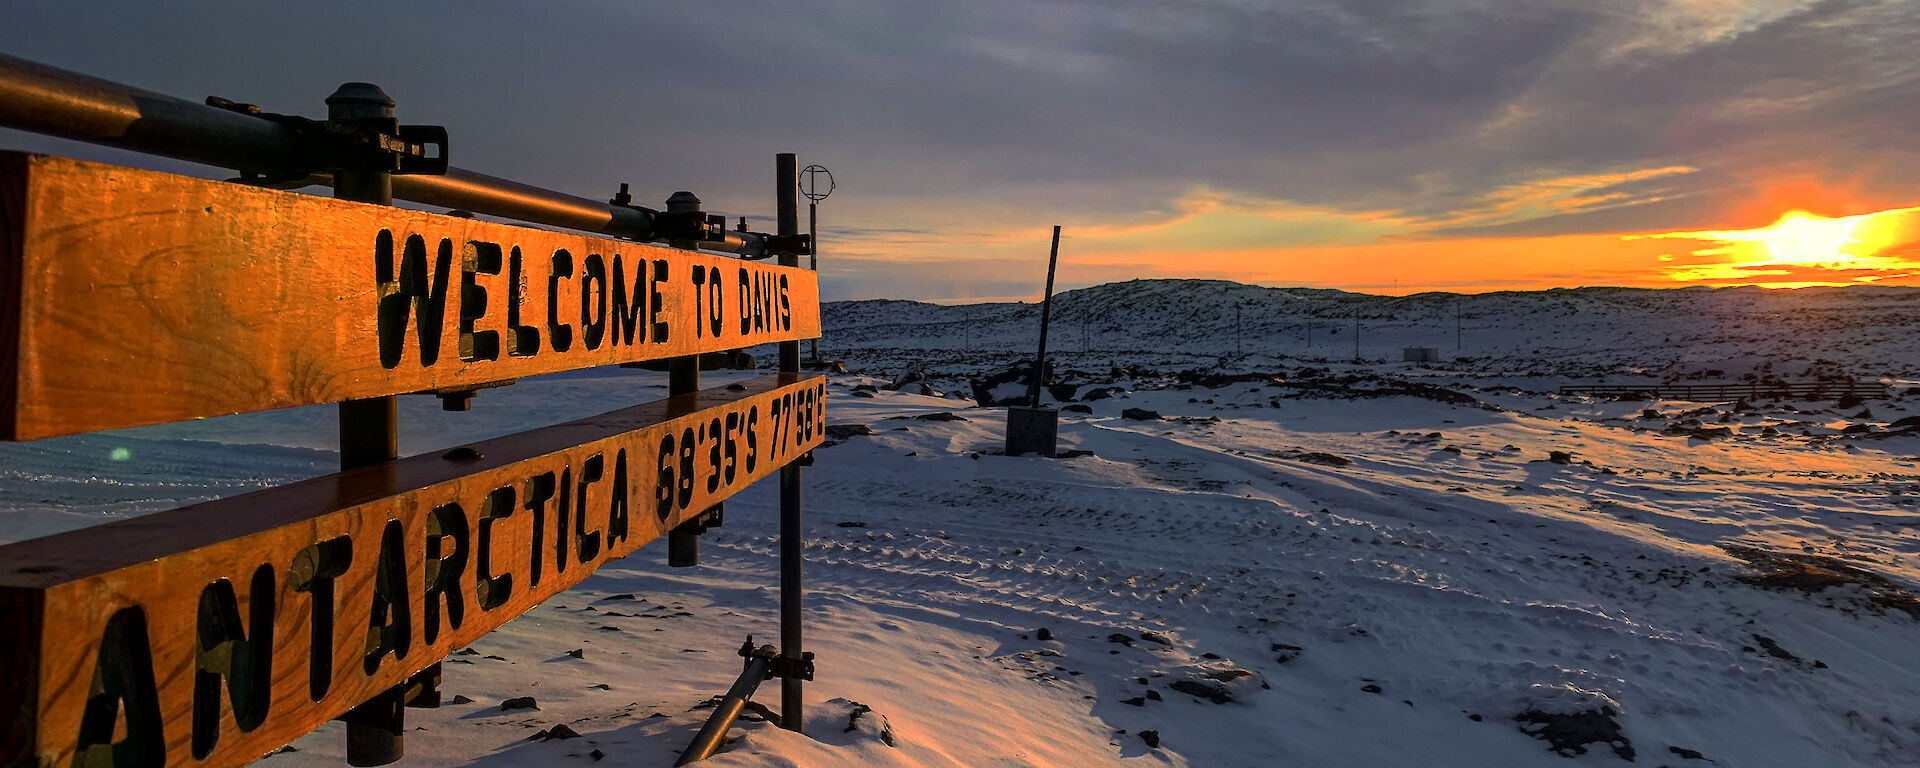 The sun sits low and yellow in the sky, illuminating a snowy landscape. a sign in the foreground says "Welcome to Davis Antarctica"